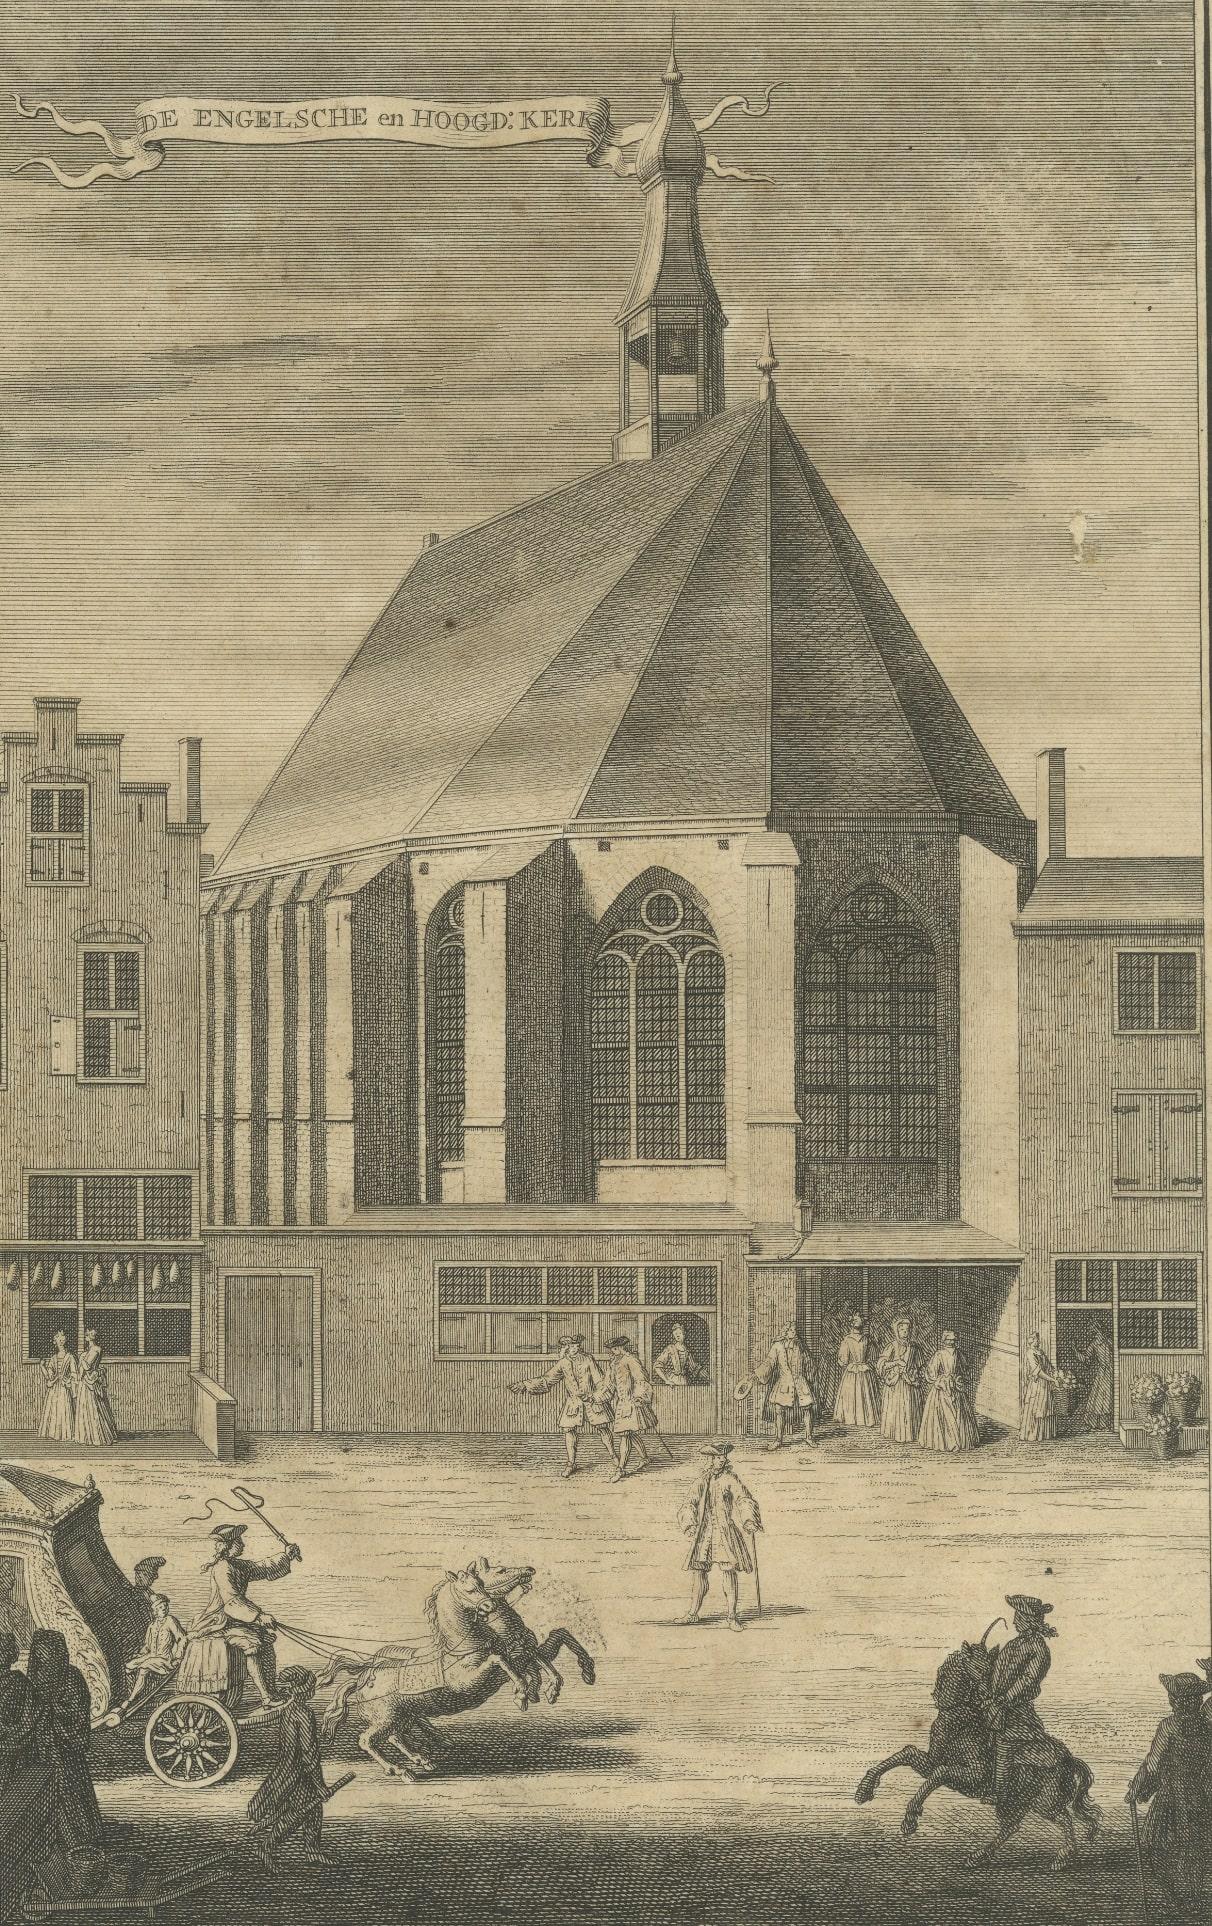 Antique print titled 'De Engelsche en Hoogd. Kerk'. View of the English and German Church situated in Noordeinde in The Hague. This former chapel of the Sacrament Hospital (R.K. Sacramentshospitaal) was used by the Anglican Church from 1586 to 1840